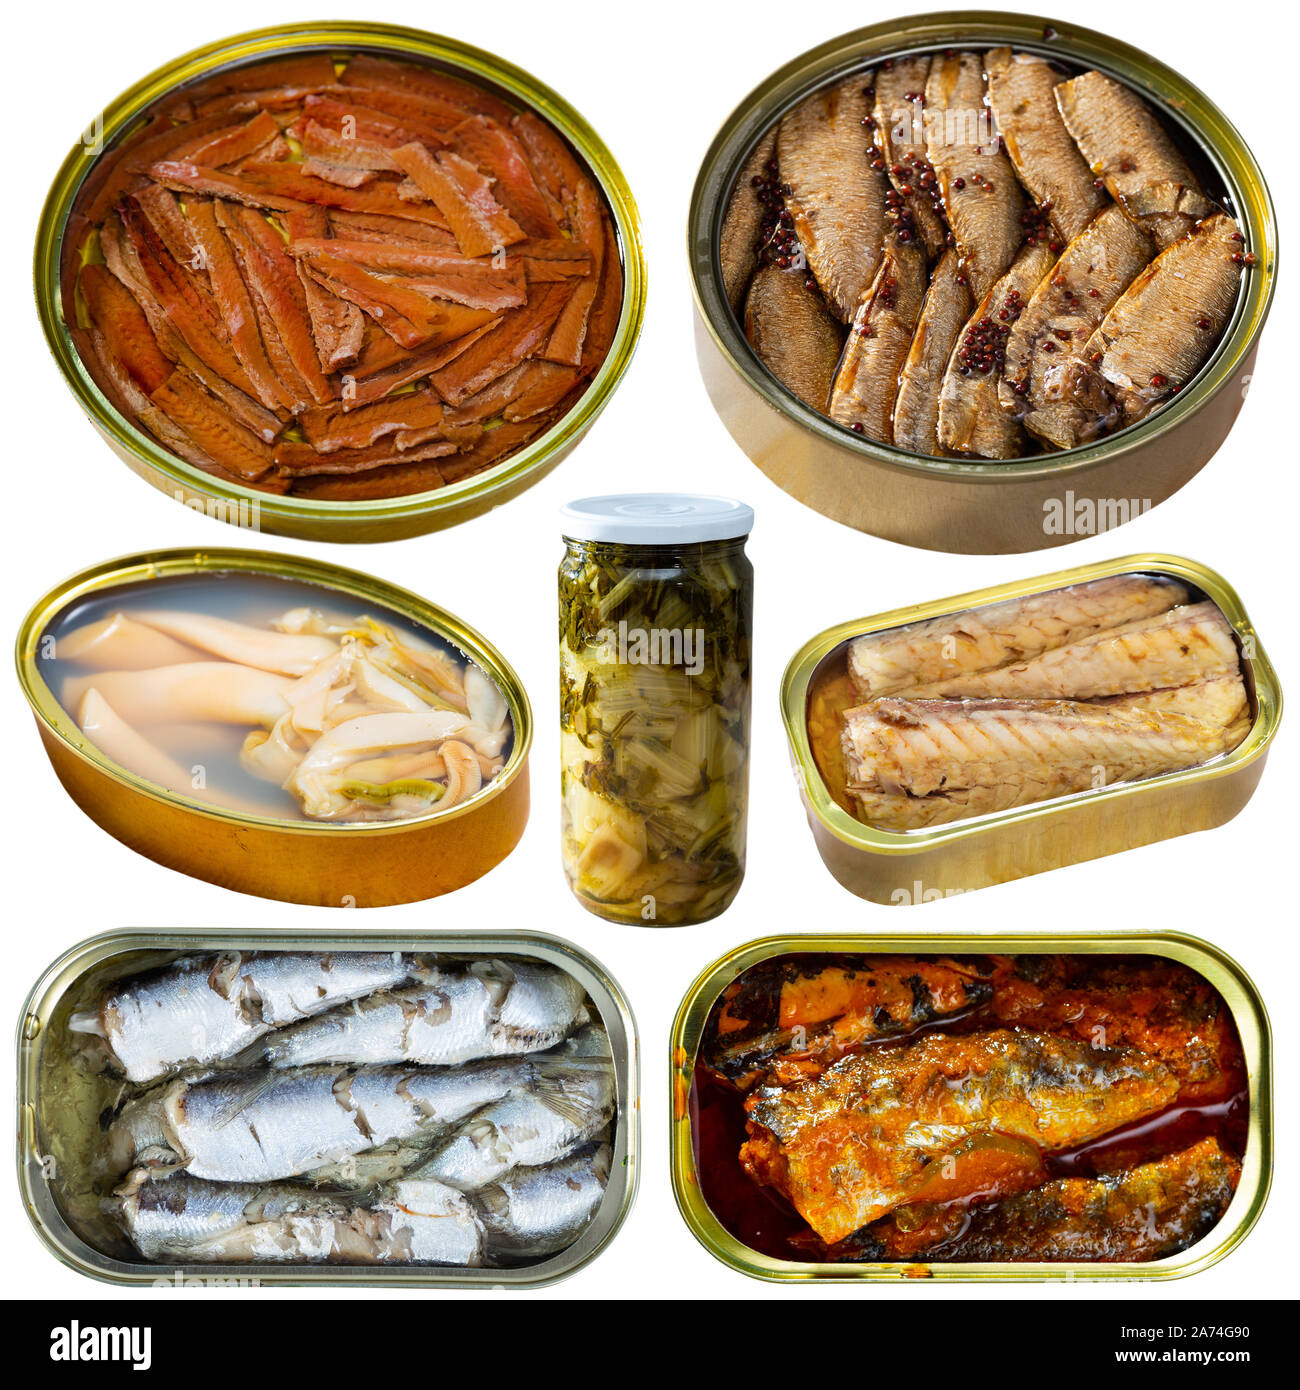 Set of various canned seafood, fish, meat, vegetables and fruits